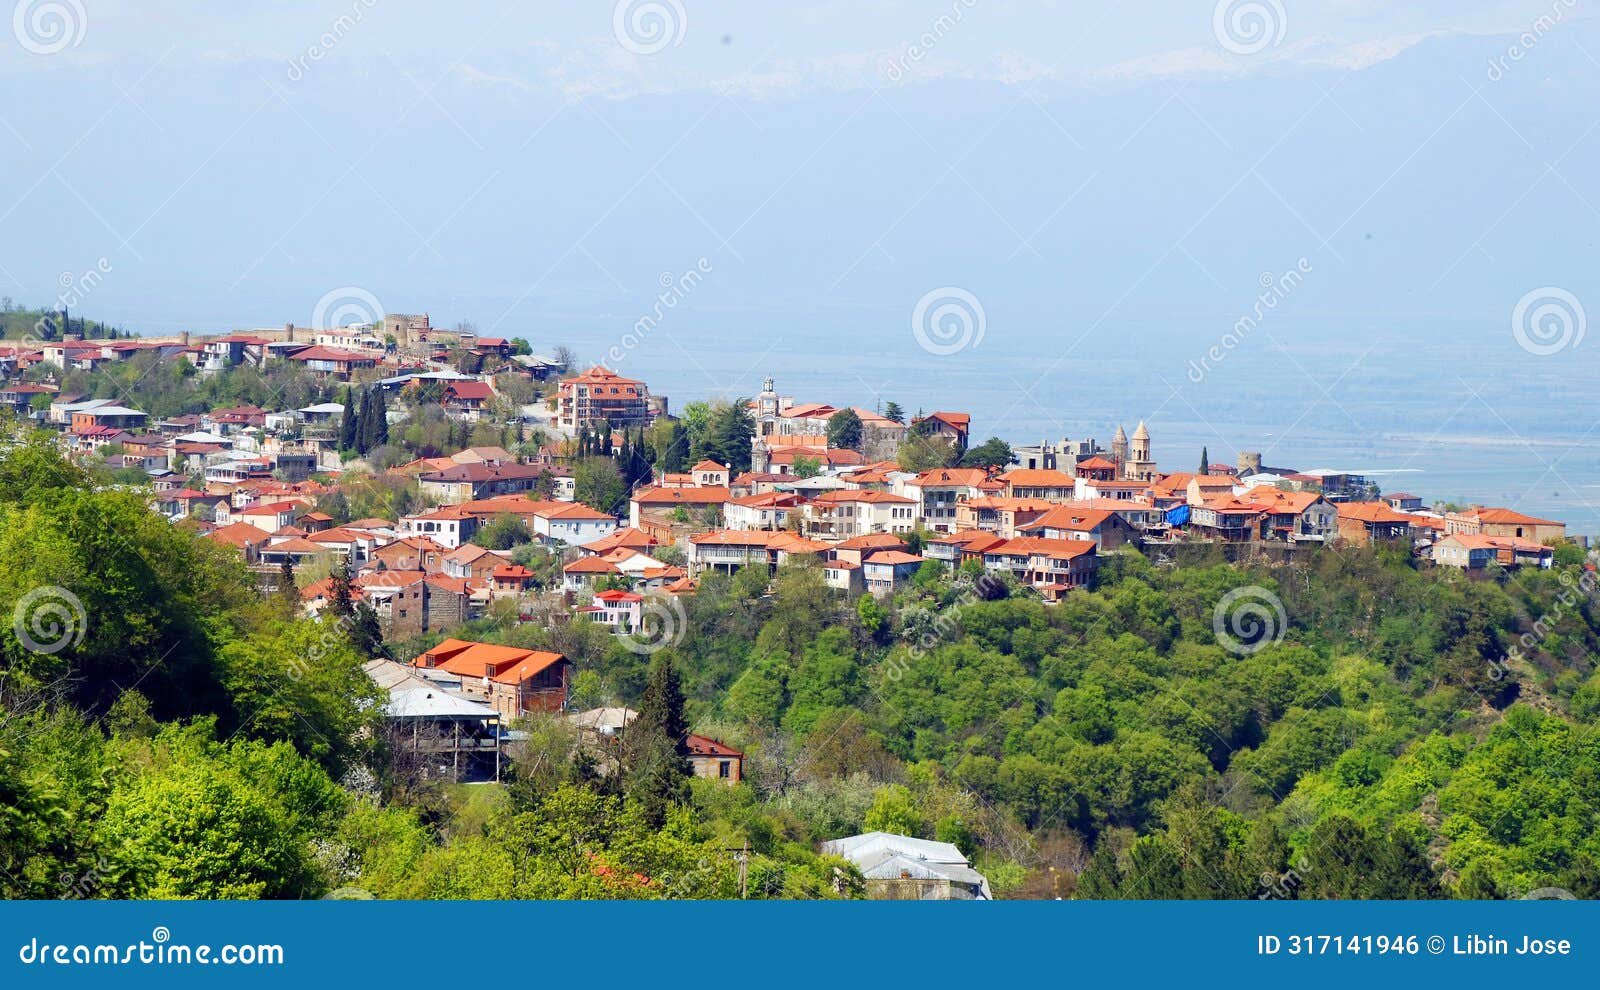 panoramic view of signagi or sighnaghi is a town in georgia